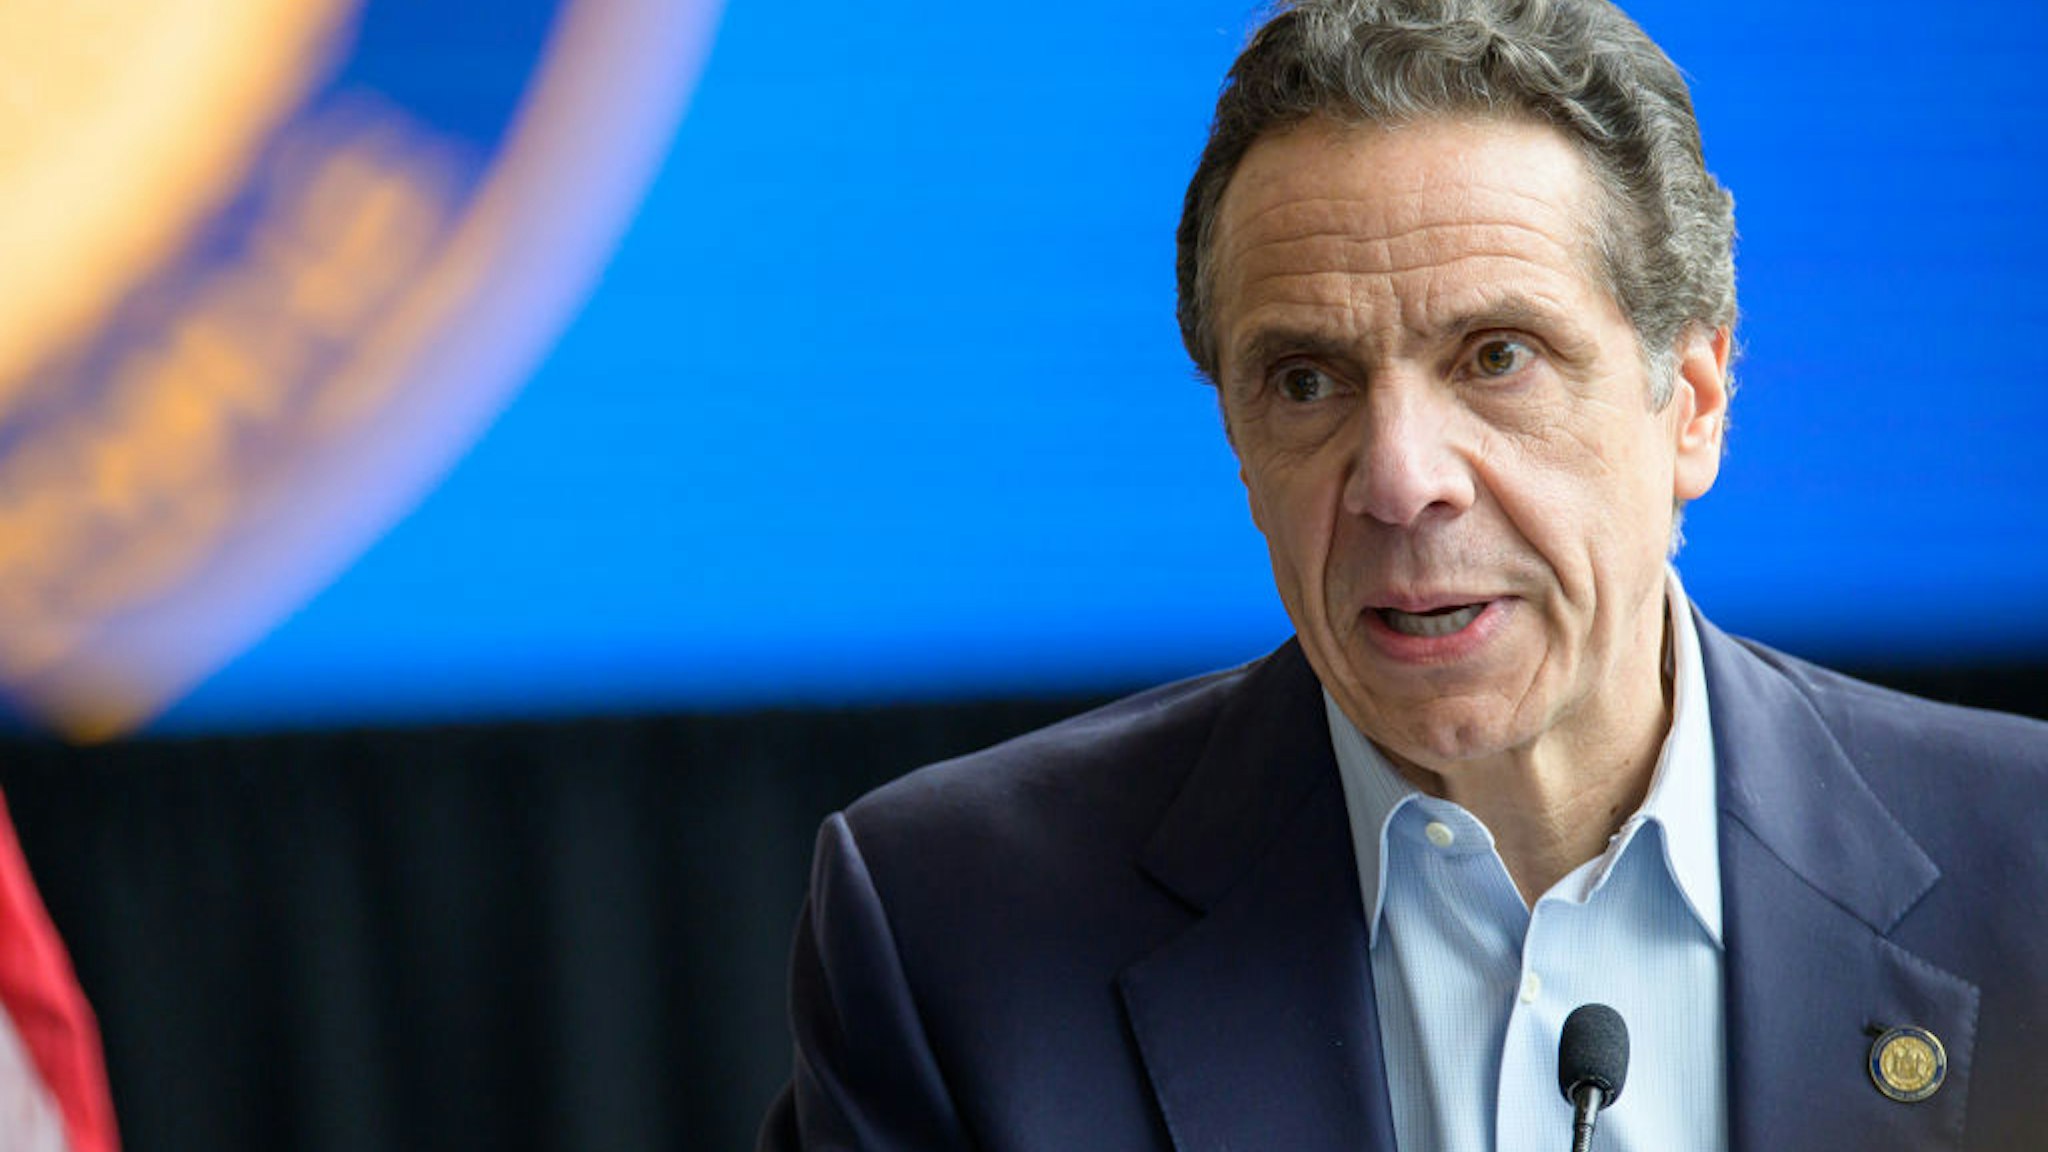 Following the arrival in New York City of the U.S. Naval hospital ship Comfort, NY State Governor Andrew Cuomo is seen during a press conference at the field hospital site at the Javits Center.